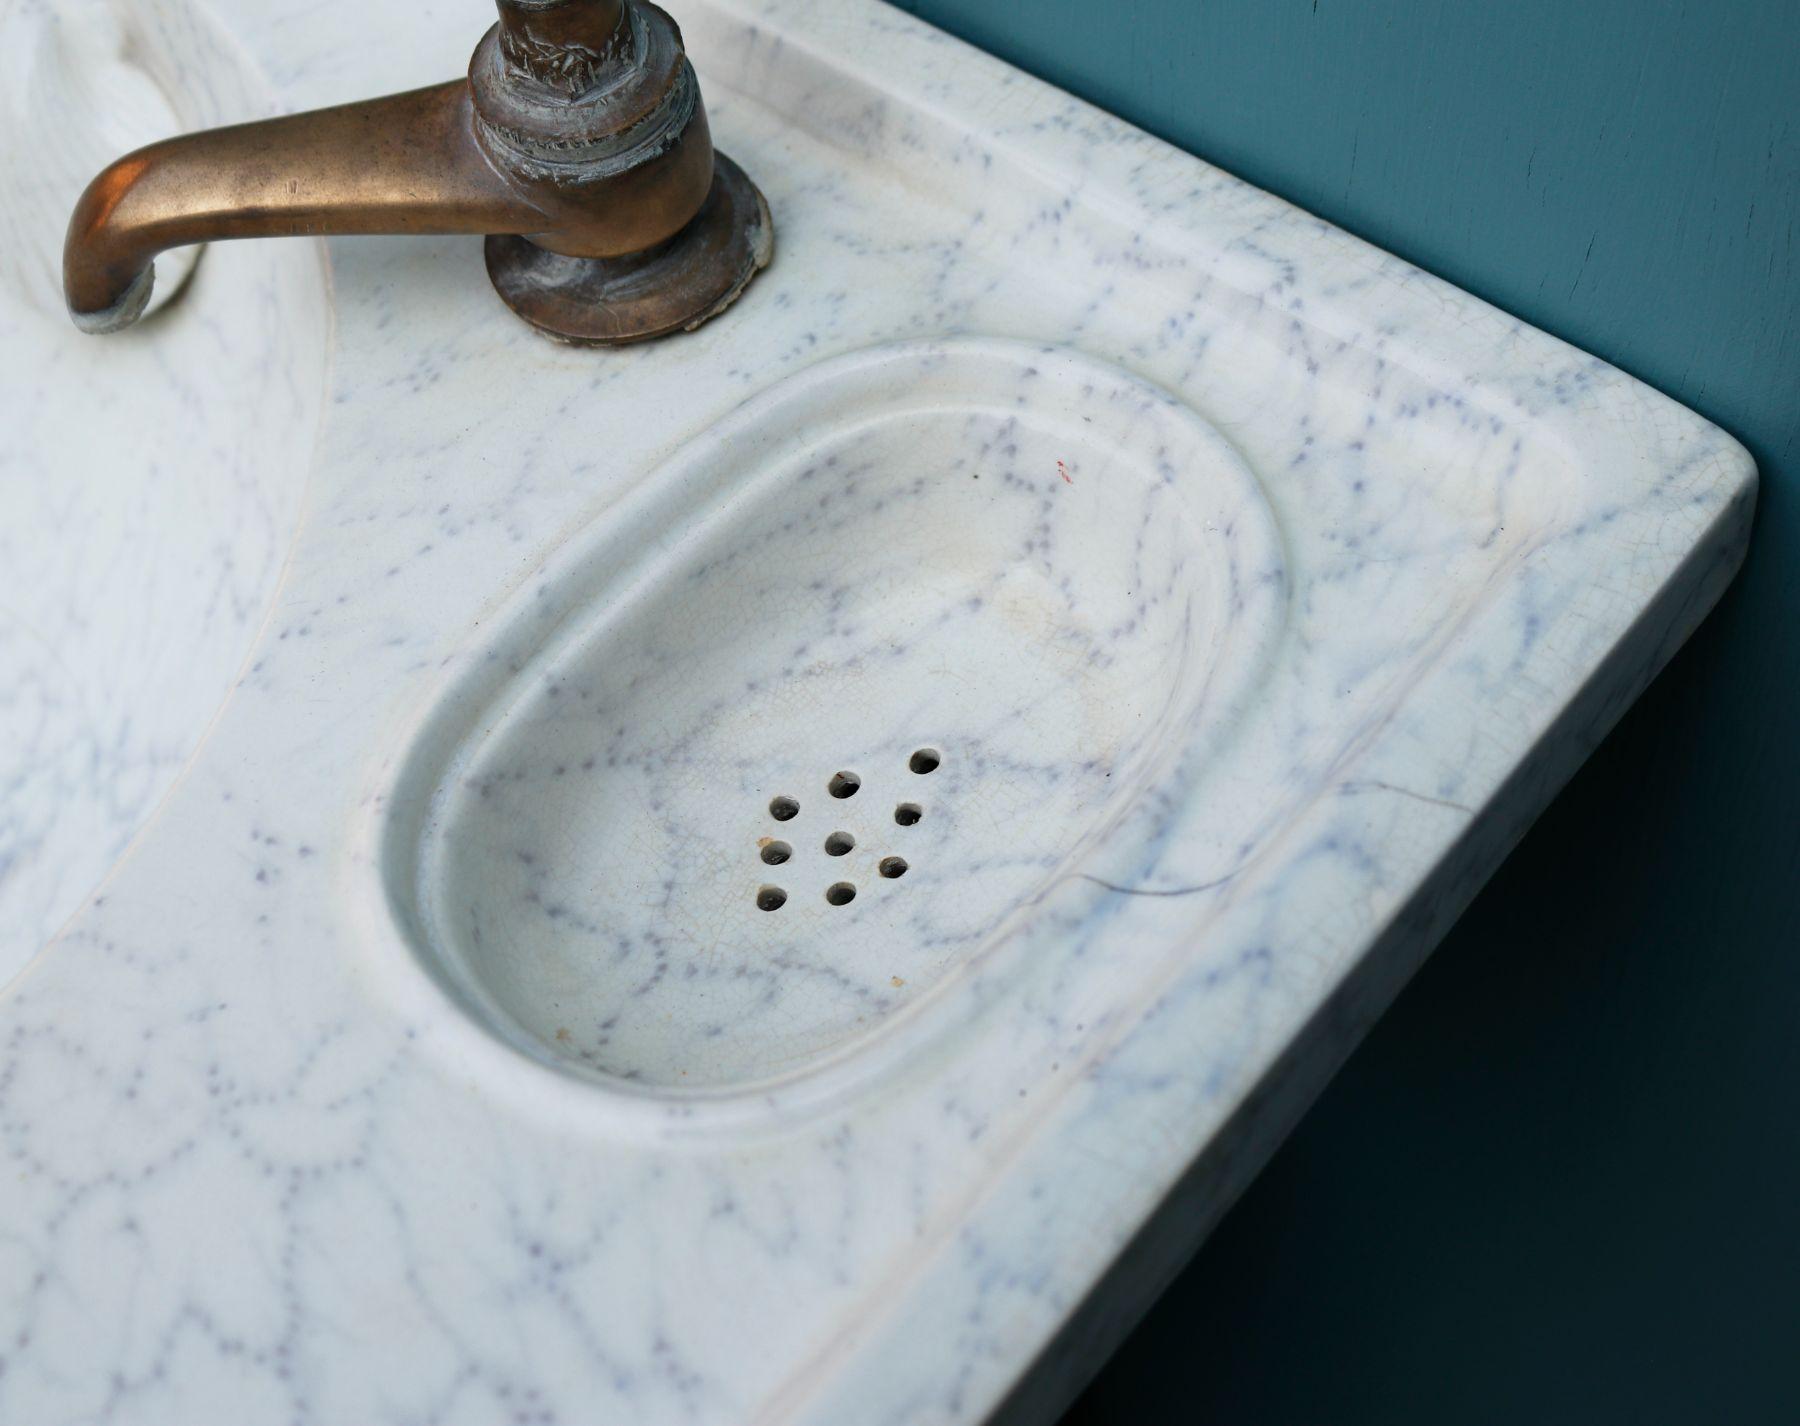 Antique Victorian wash basin or sink, with a marble effect finish, hand painted under the glaze. Includes original taps.

Decorative shell overflow and draining soap dishes.